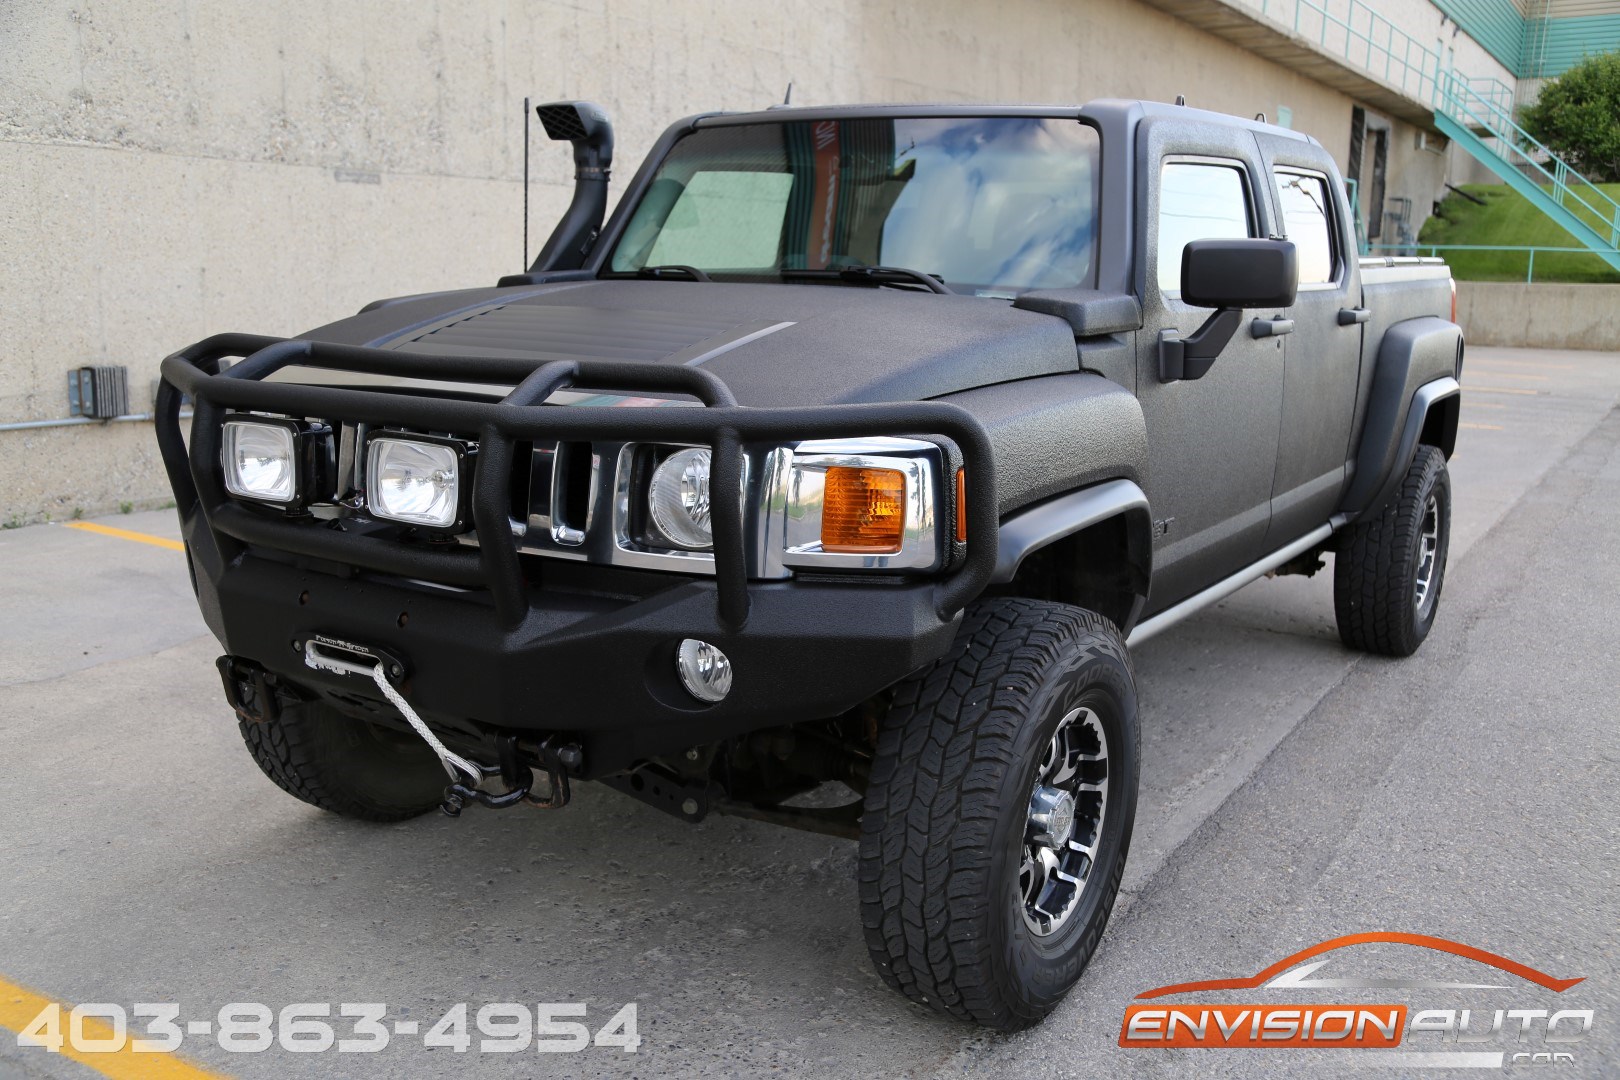 2009 Hummer H3T Truck – Offroad Package – Lifted – 5 Speed Manual | Envision ...1620 x 1080